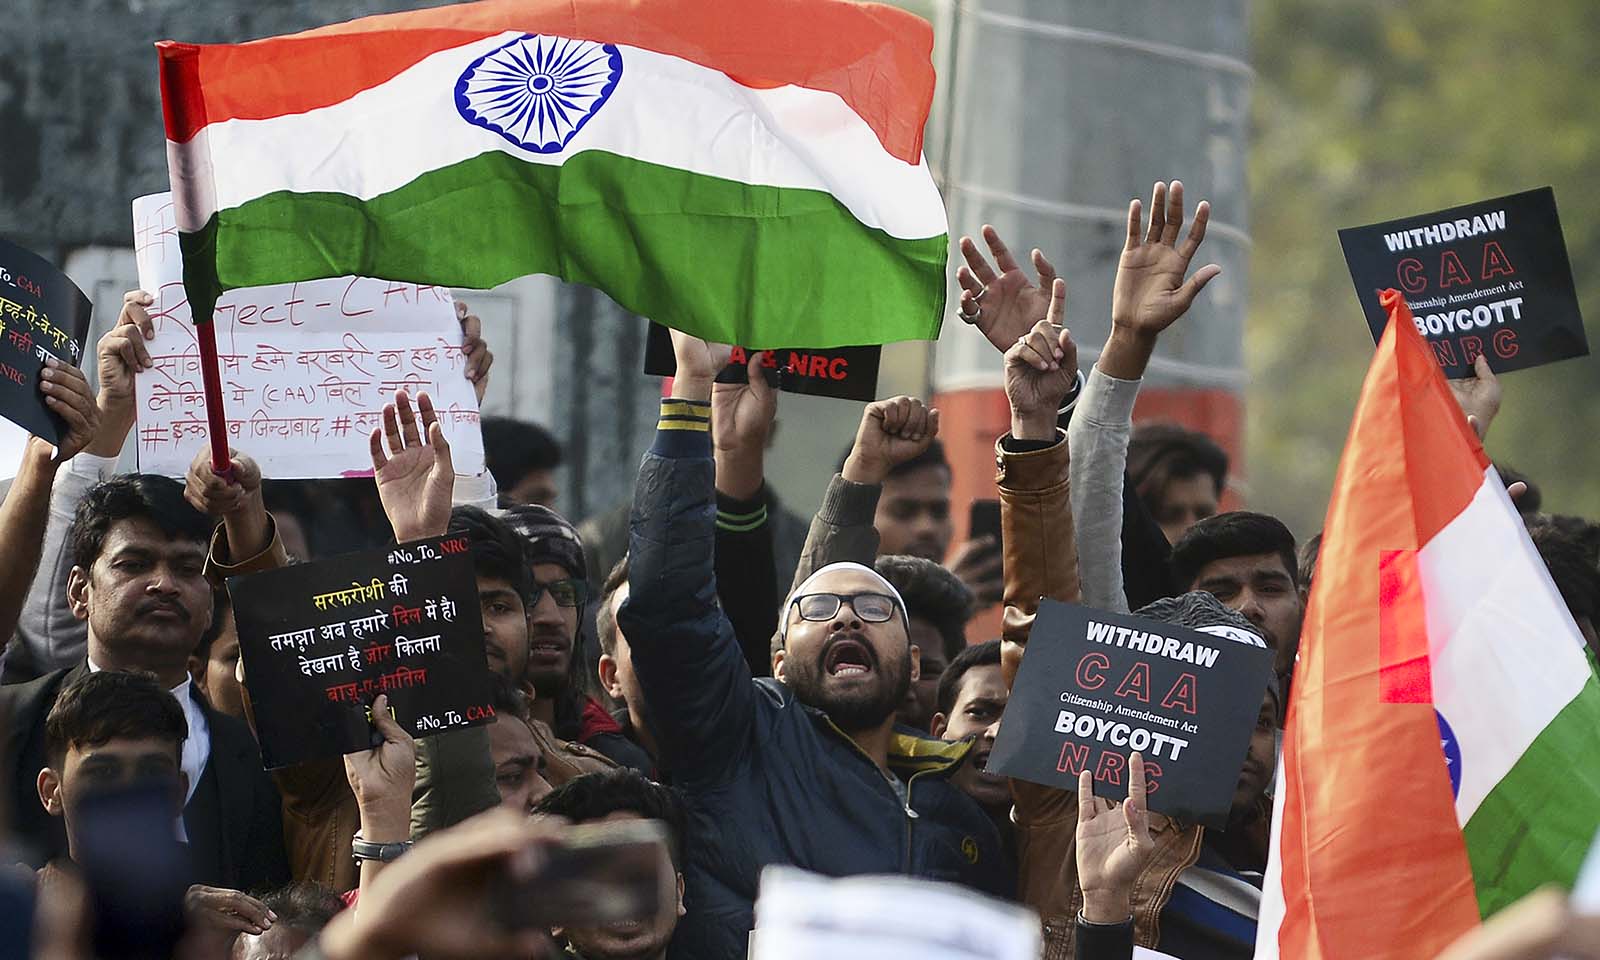 Protesters shout slogans during a demonstration against India's new citizenship law in Allahabad on December 19, 2019